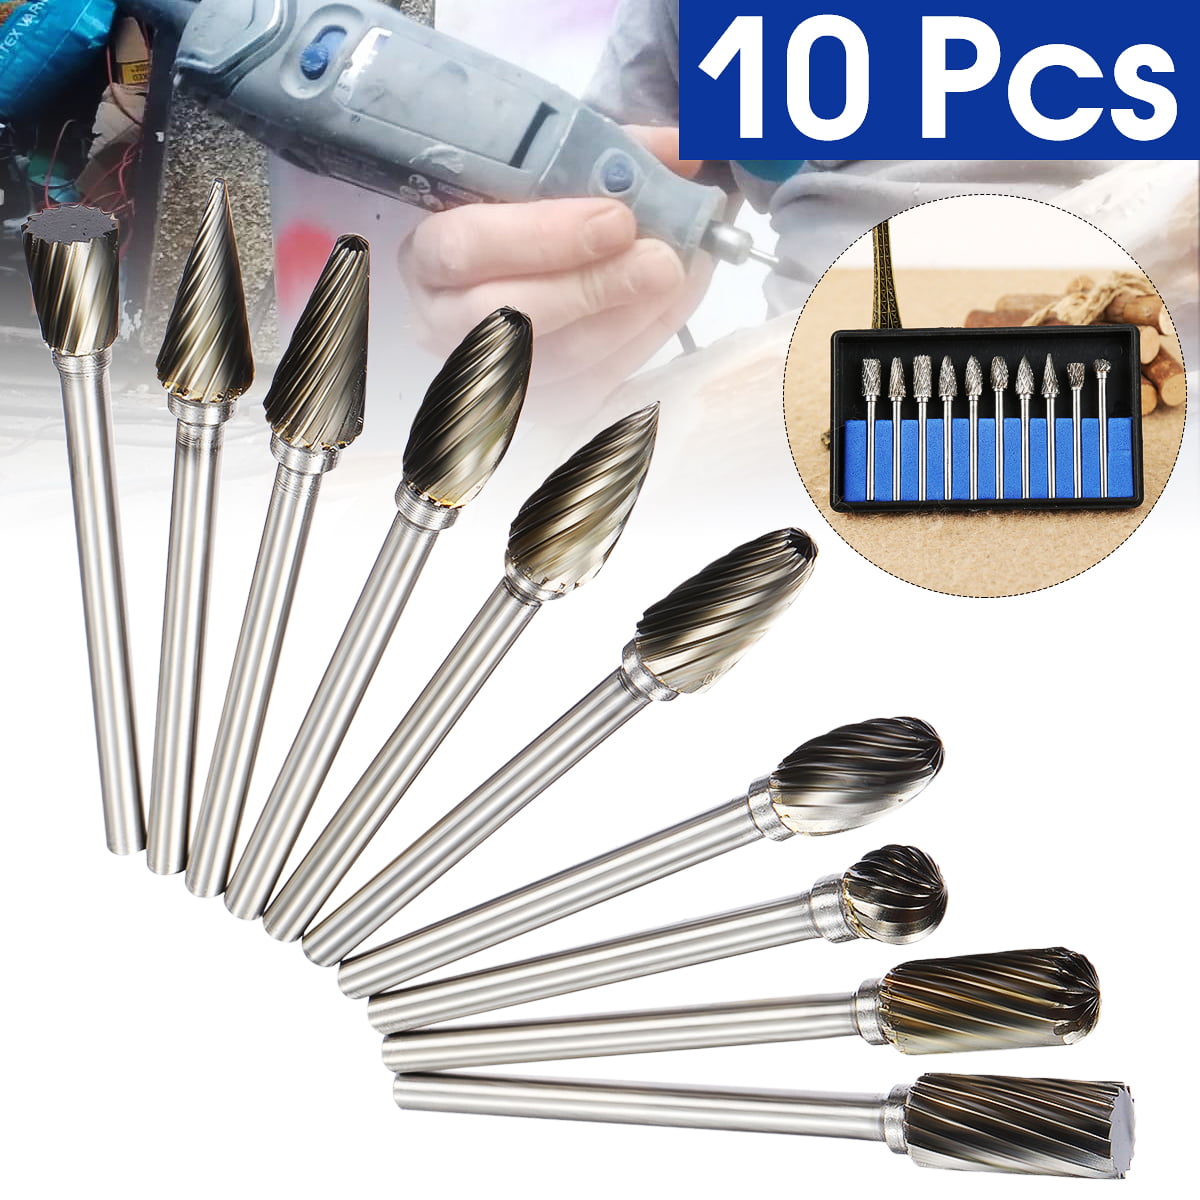 10Pcs Tungsten Steel Solid Carbide Burrs For Dremel Rotary Tool Bit Accessories 